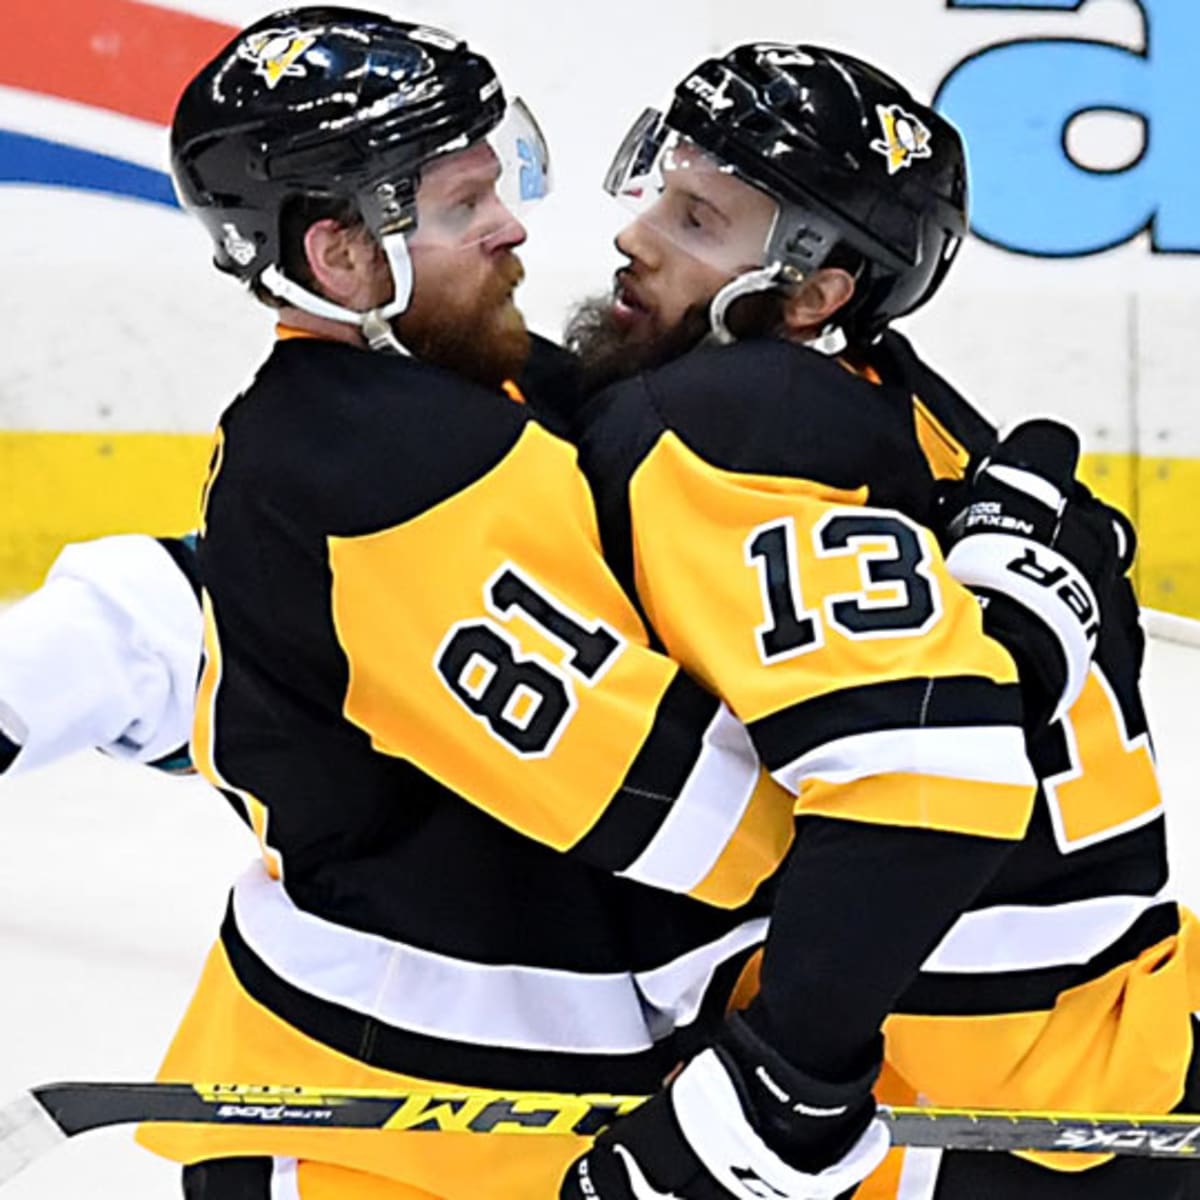 Kessel an unlikely hero for the Penguins